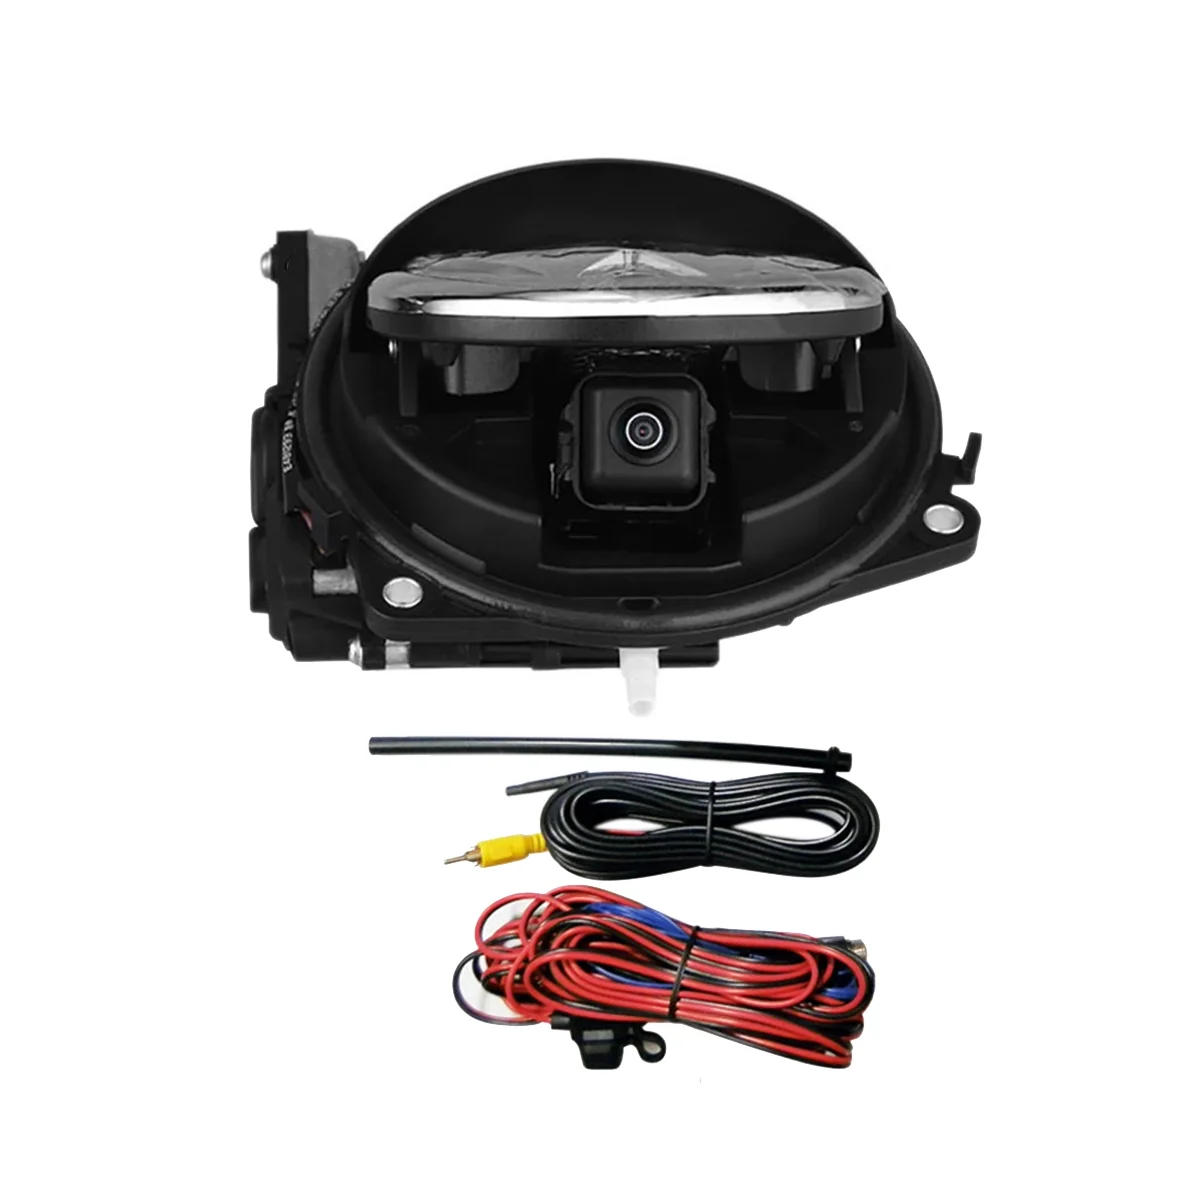 

Car Flipping Rearview Camera with Wire for Passat B8 B6 B7 Golf MK7 MK5 MK6-PoloTrunk Switch Reverse Parking HD Camera